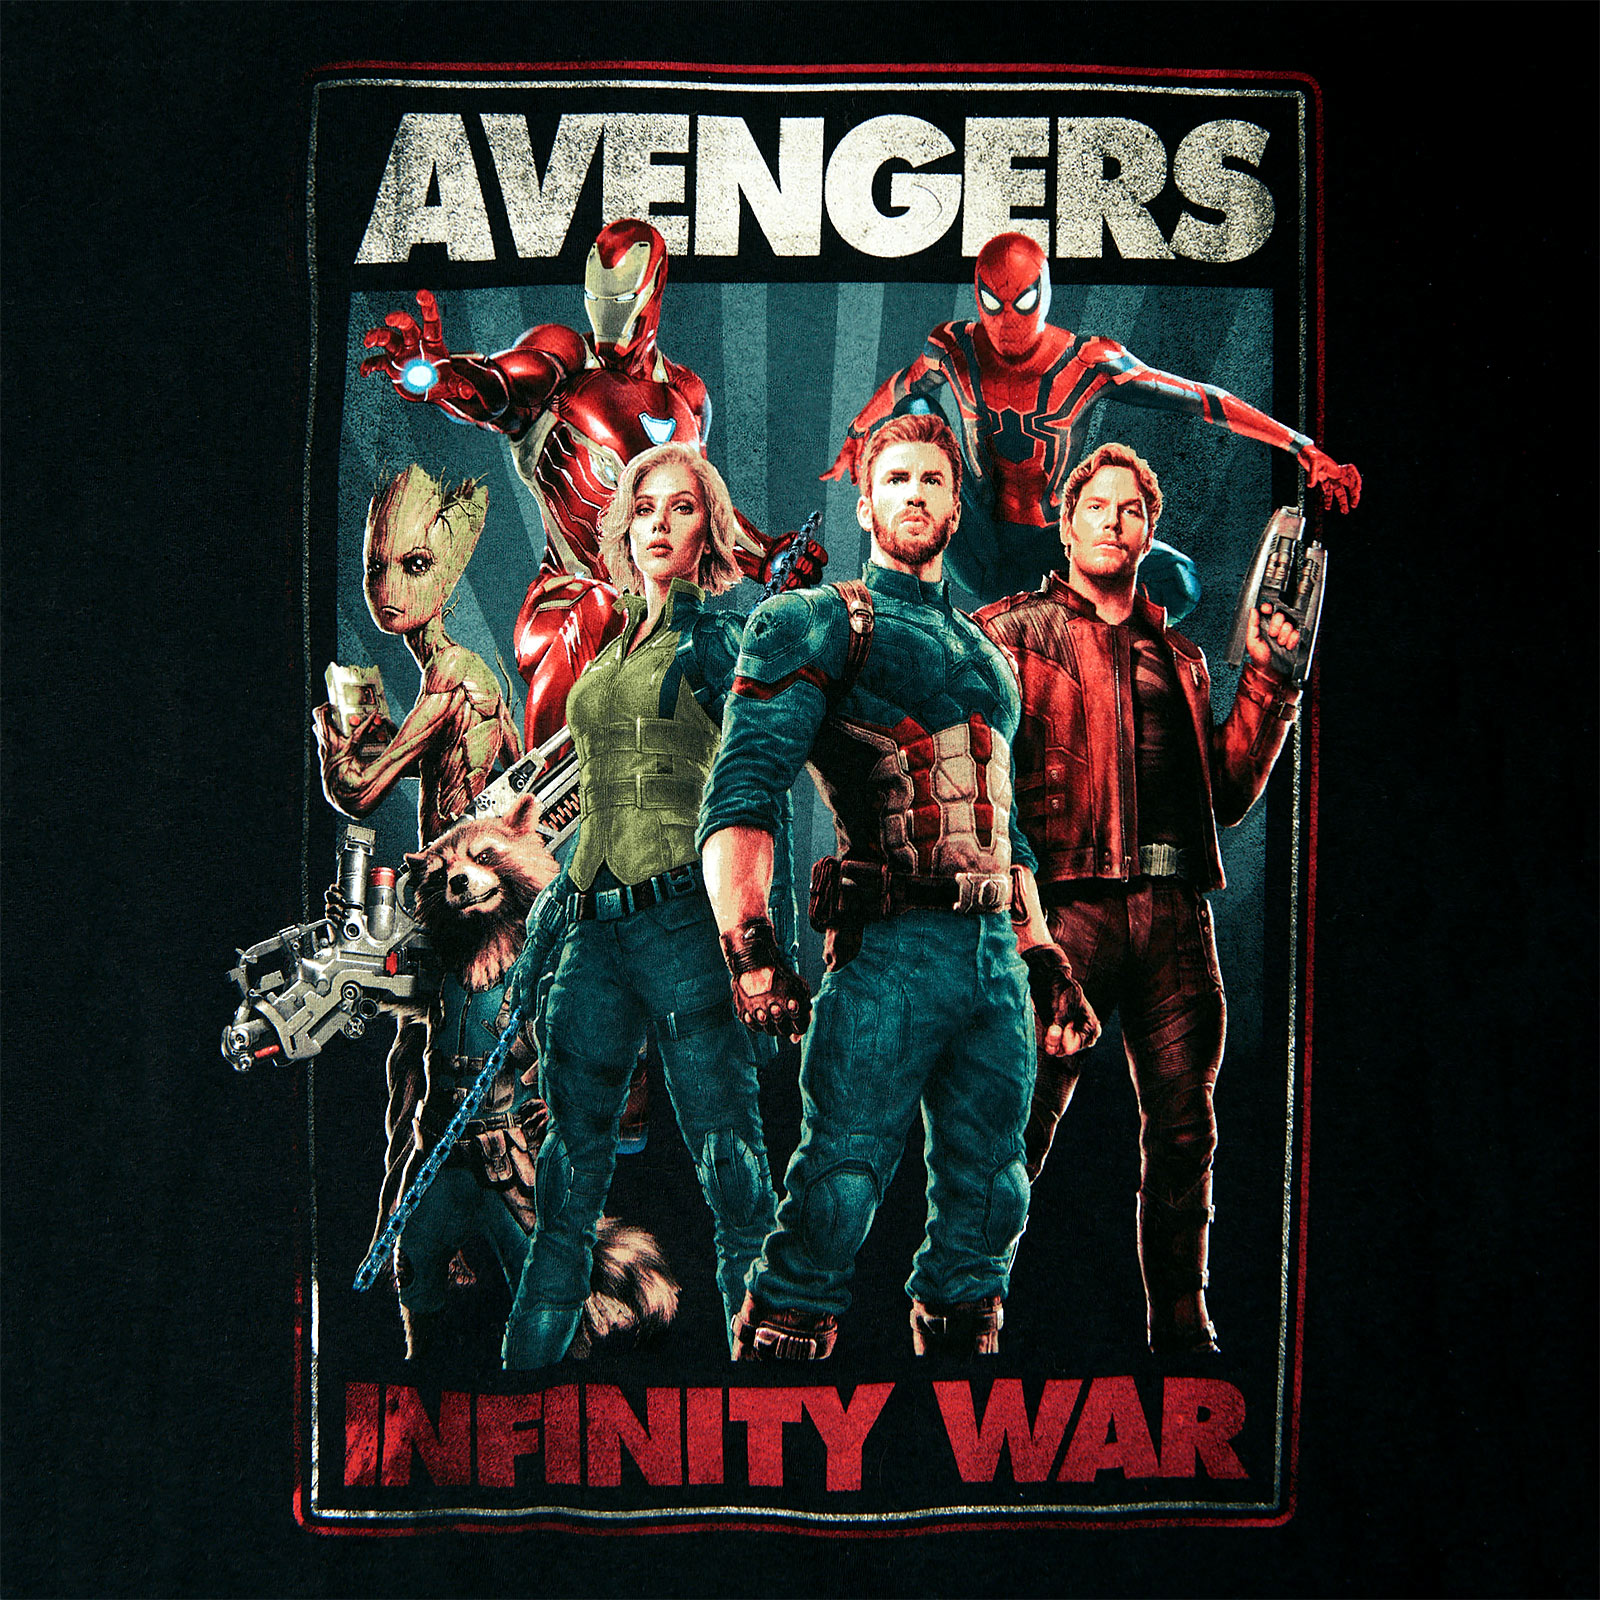 Avengers - T-shirt collage Infinity Heroes noir